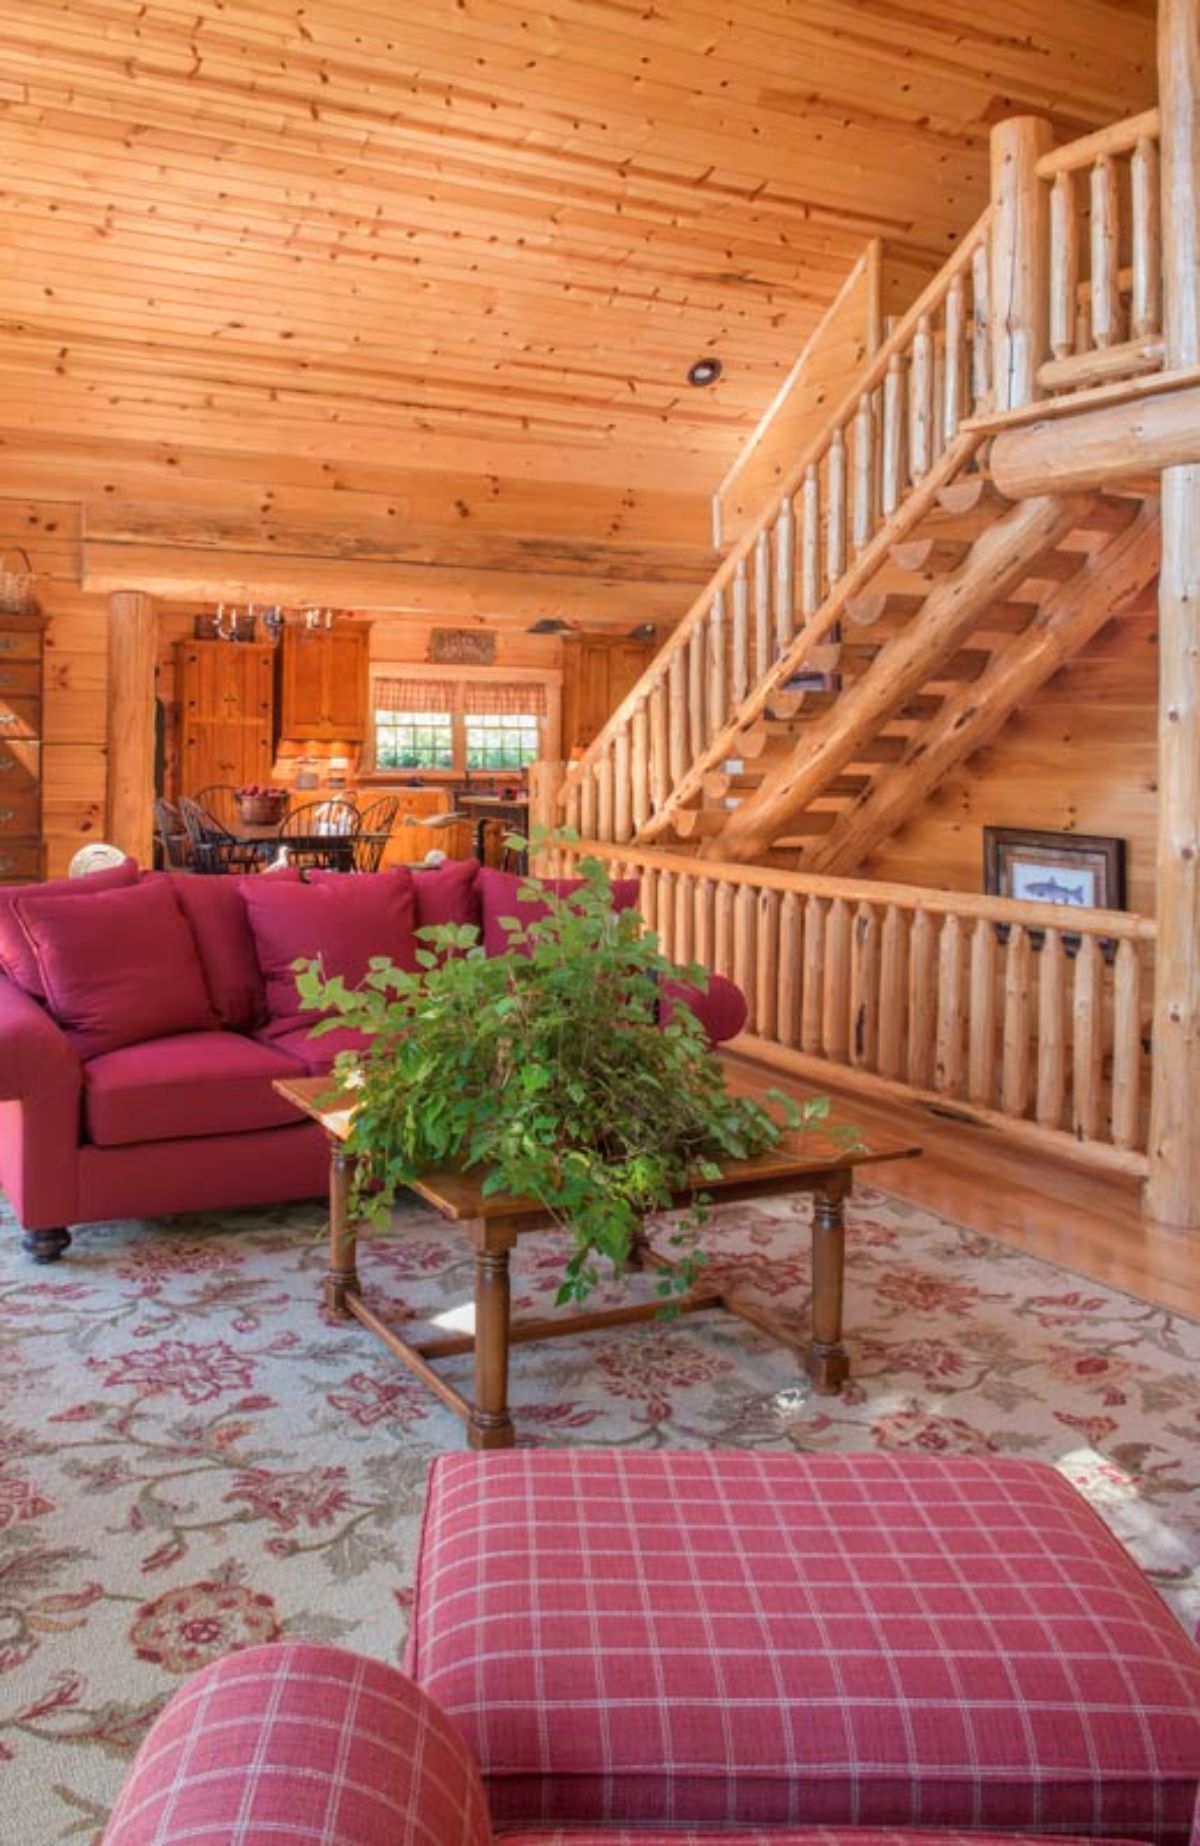 log stairs to loft and basement on right with red sofa in front of wood coffee table